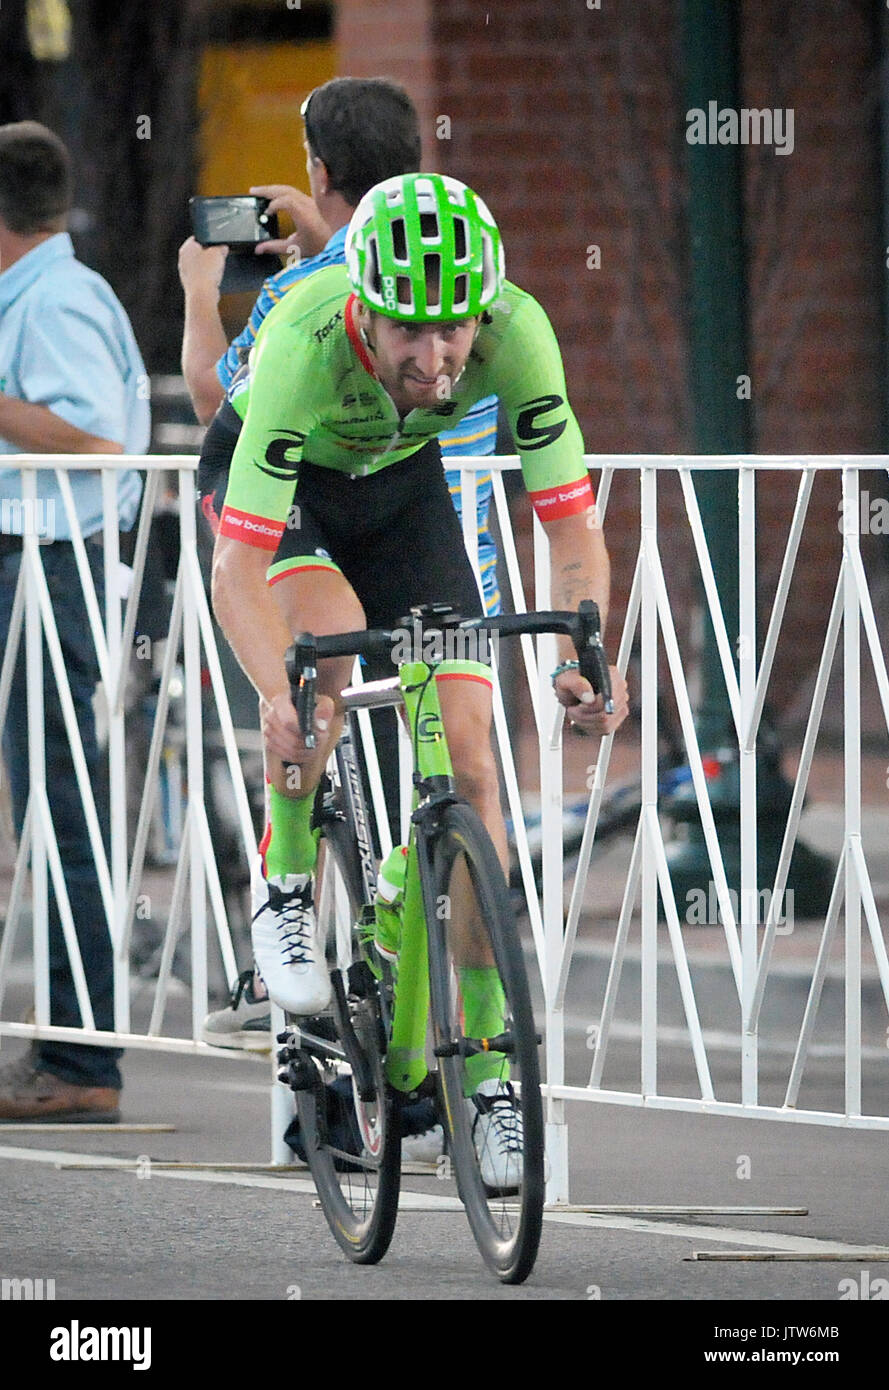 Colorado Springs, Colorado, USA. 10th Aug, 2017. Colorado Springs, Colorado, U.S. - Cannondale Drapac rider, Taylor Phinney, attempts a solo breakaway during the opening stage of the inaugural Colorado Classic cycling race, Colorado Springs, Colorado. Credit: Cal Sport Media/Alamy Live News Stock Photo